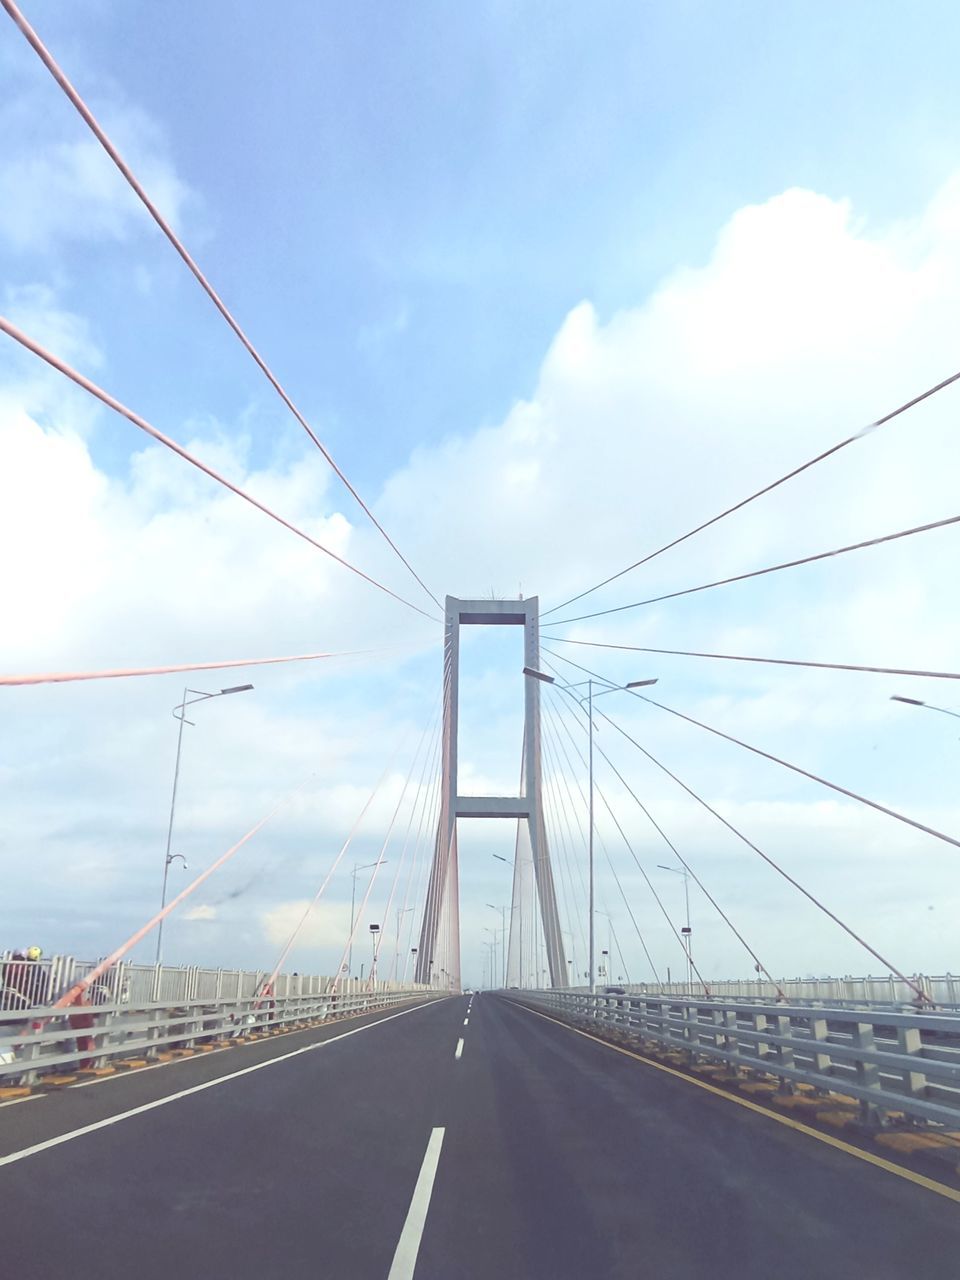 transportation, road, sky, bridge, architecture, cloud, built structure, city, suspension bridge, cable-stayed bridge, the way forward, nature, cable, travel, street, travel destinations, traffic, car, motor vehicle, highway, no people, line, mode of transportation, sign, vanishing point, cityscape, symbol, day, outdoors, city life, building exterior, diminishing perspective, road marking, tourism, blue, landscape, motion, marking, urban skyline, steel cable, land vehicle, cloudscape, water, sunlight